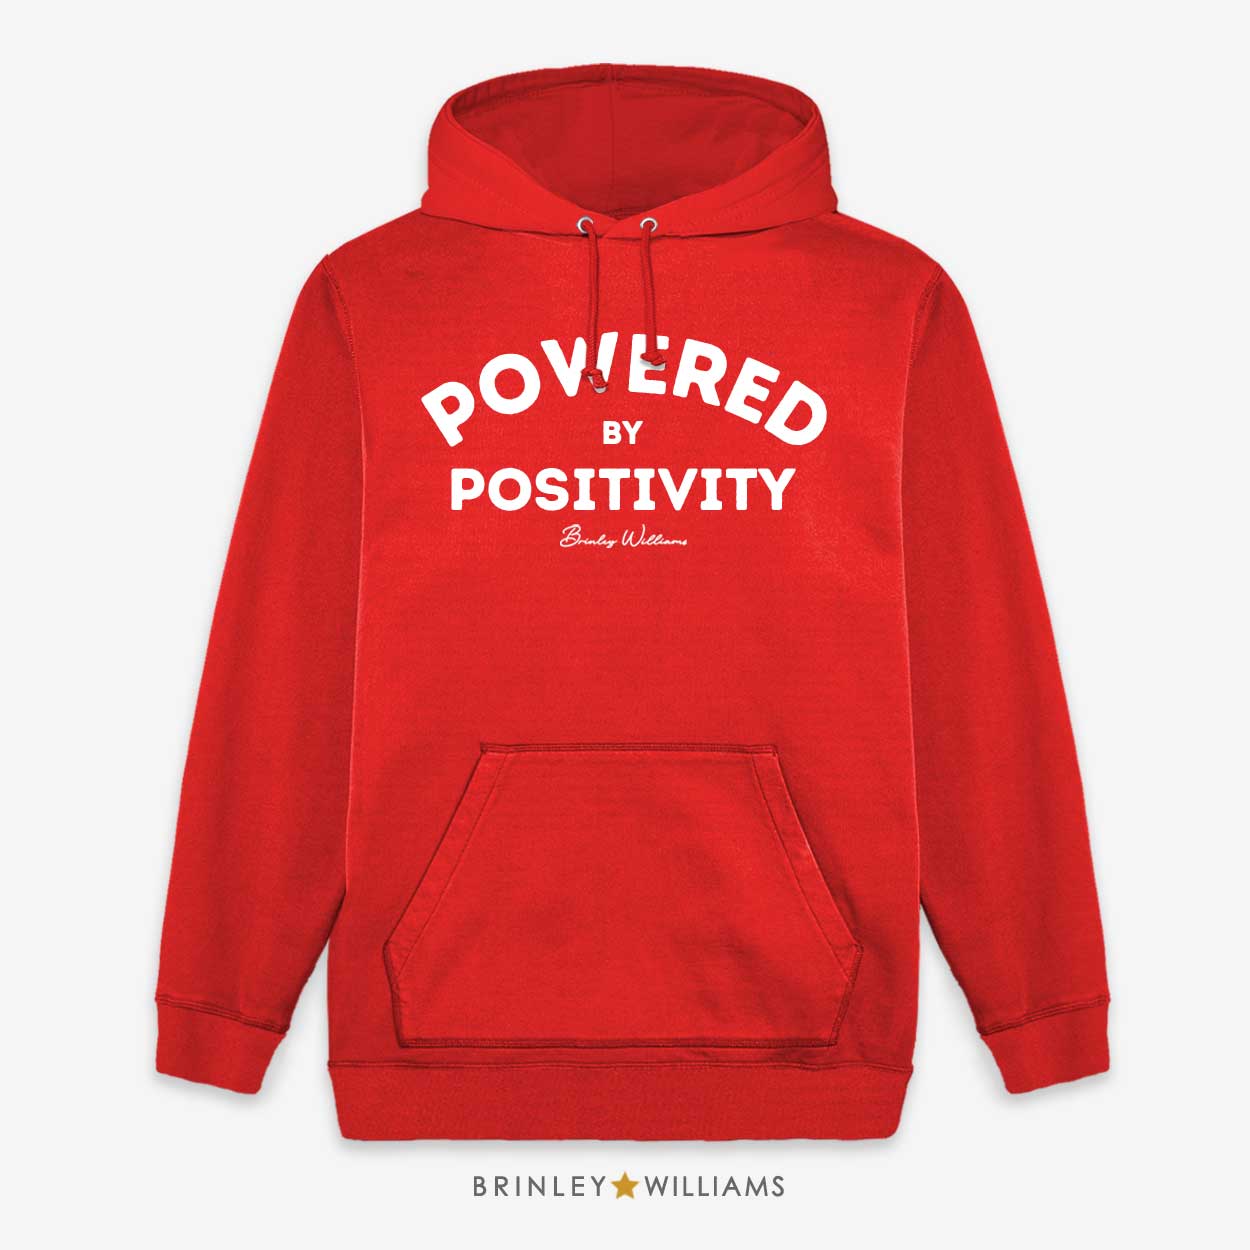 Powered by Positivity Kids Unisex Hoodie - Fire red